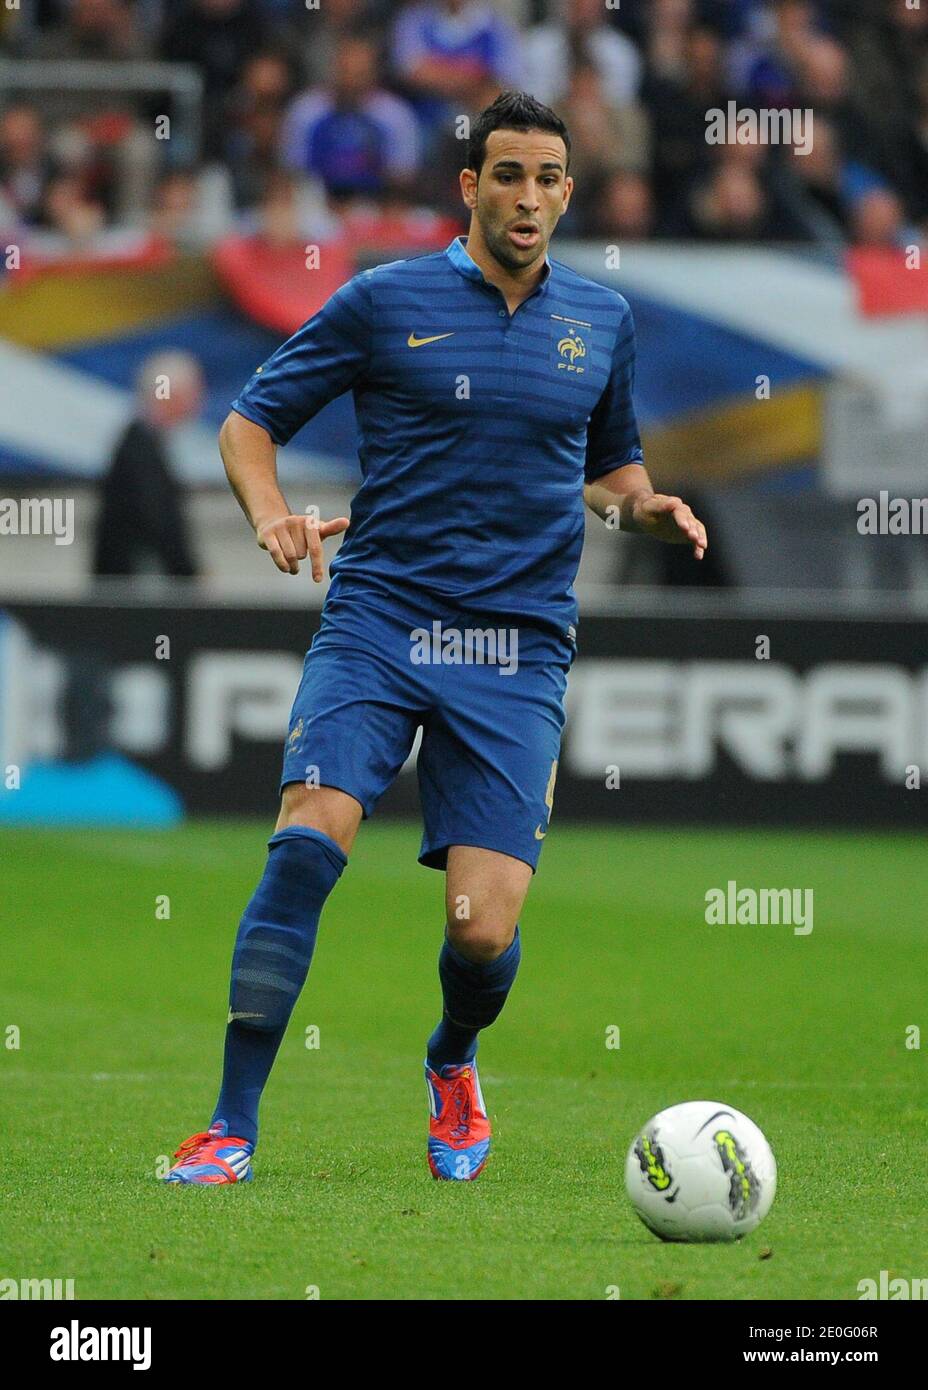 France's Adil Rami during an International Friendly soccer match, France Vs Estonia at MMArena stadium in Le Mans, France, on June 5, 2012. France won 4-0. Photo by ABACAPRESS.COM Stock Photo